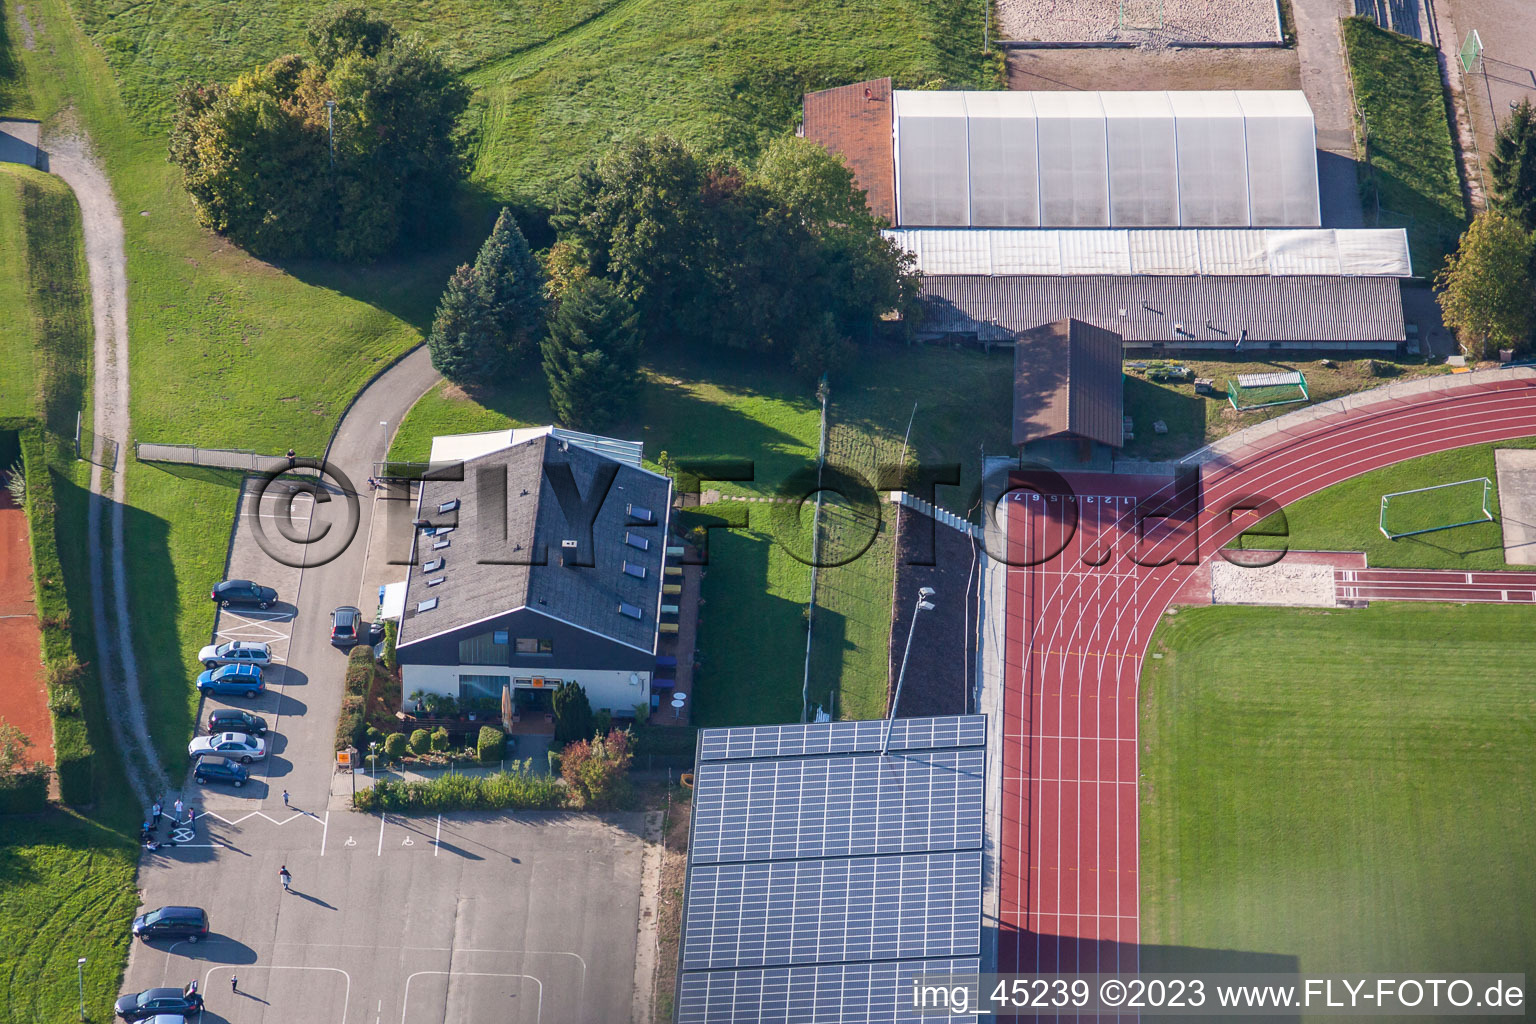 Sports grounds of SV-1899 eV Langensteinbach in the district Langensteinbach in Karlsbad in the state Baden-Wuerttemberg, Germany seen from a drone